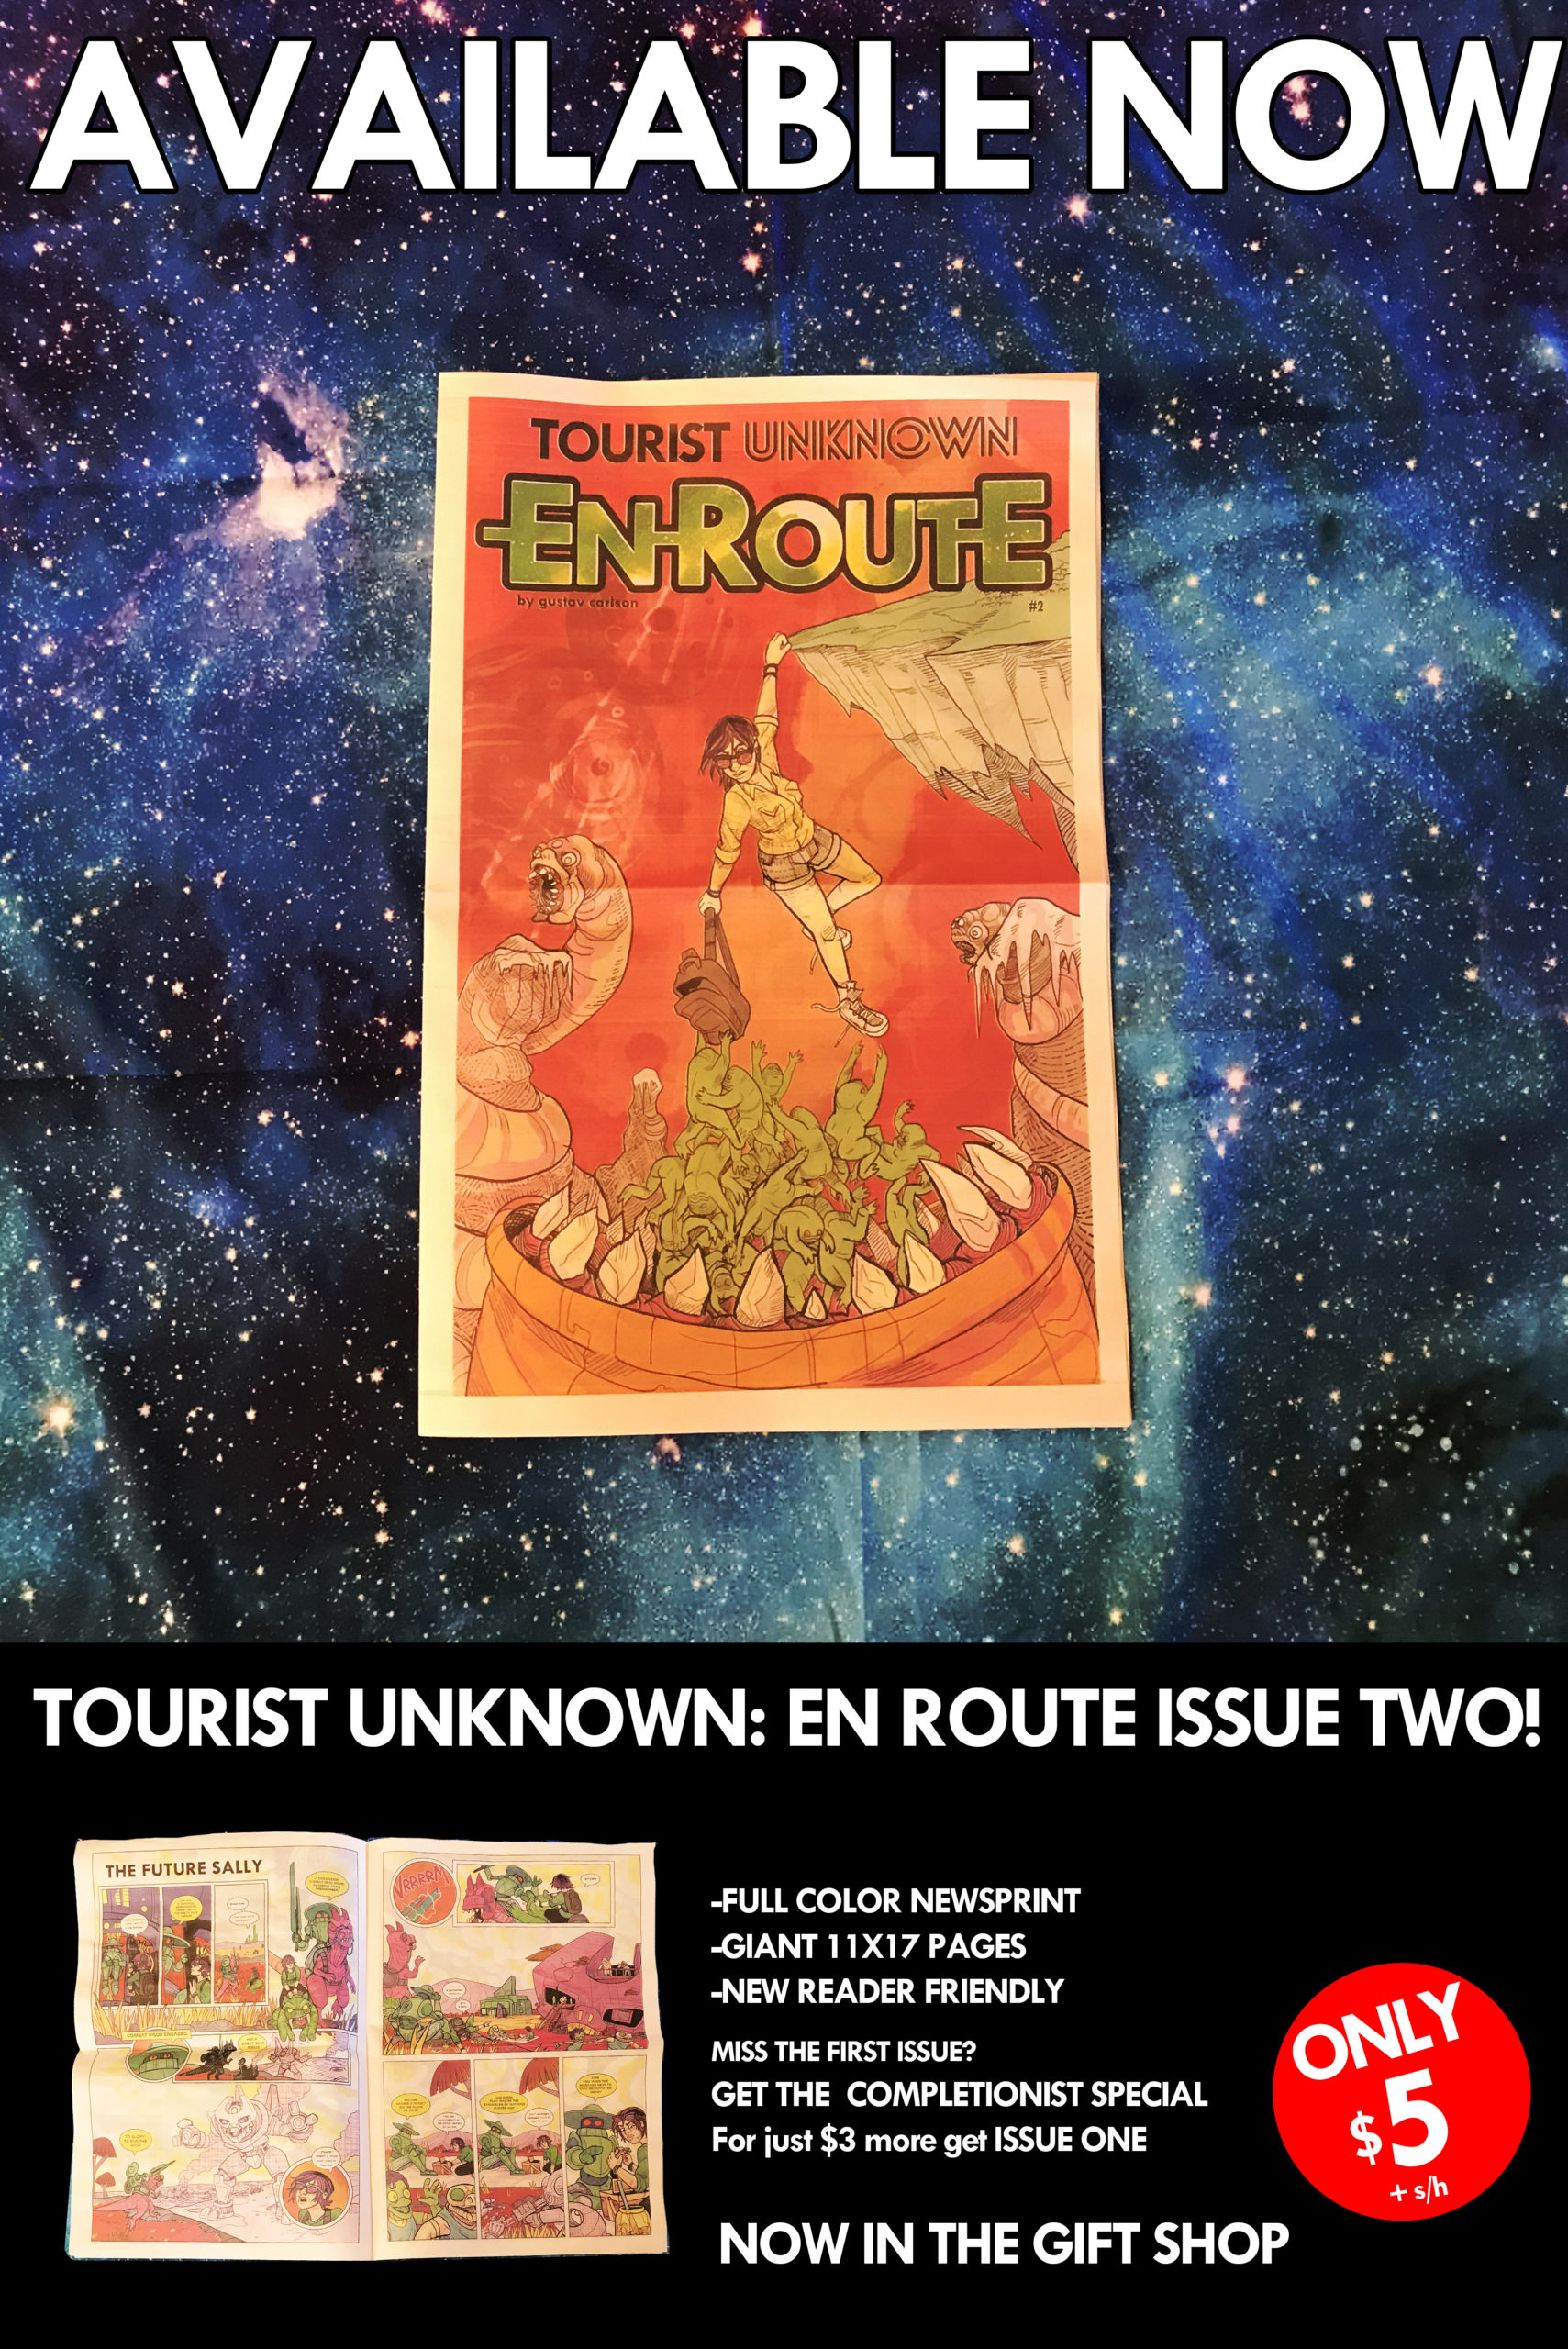 EN ROUTE ISSUE TWO AVAILABLE NOW!